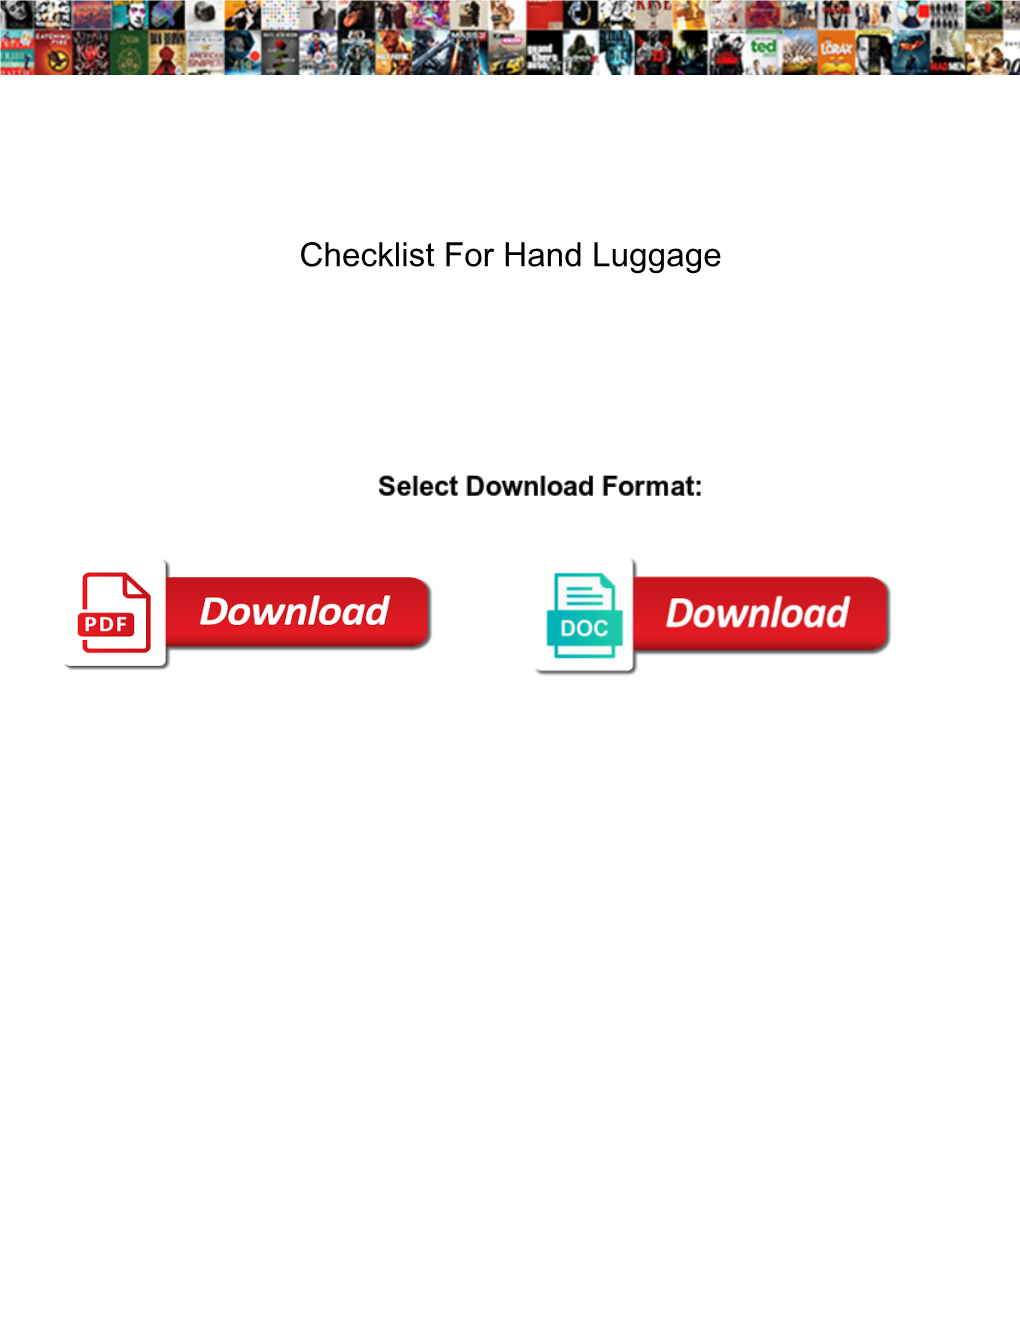 Checklist for Hand Luggage